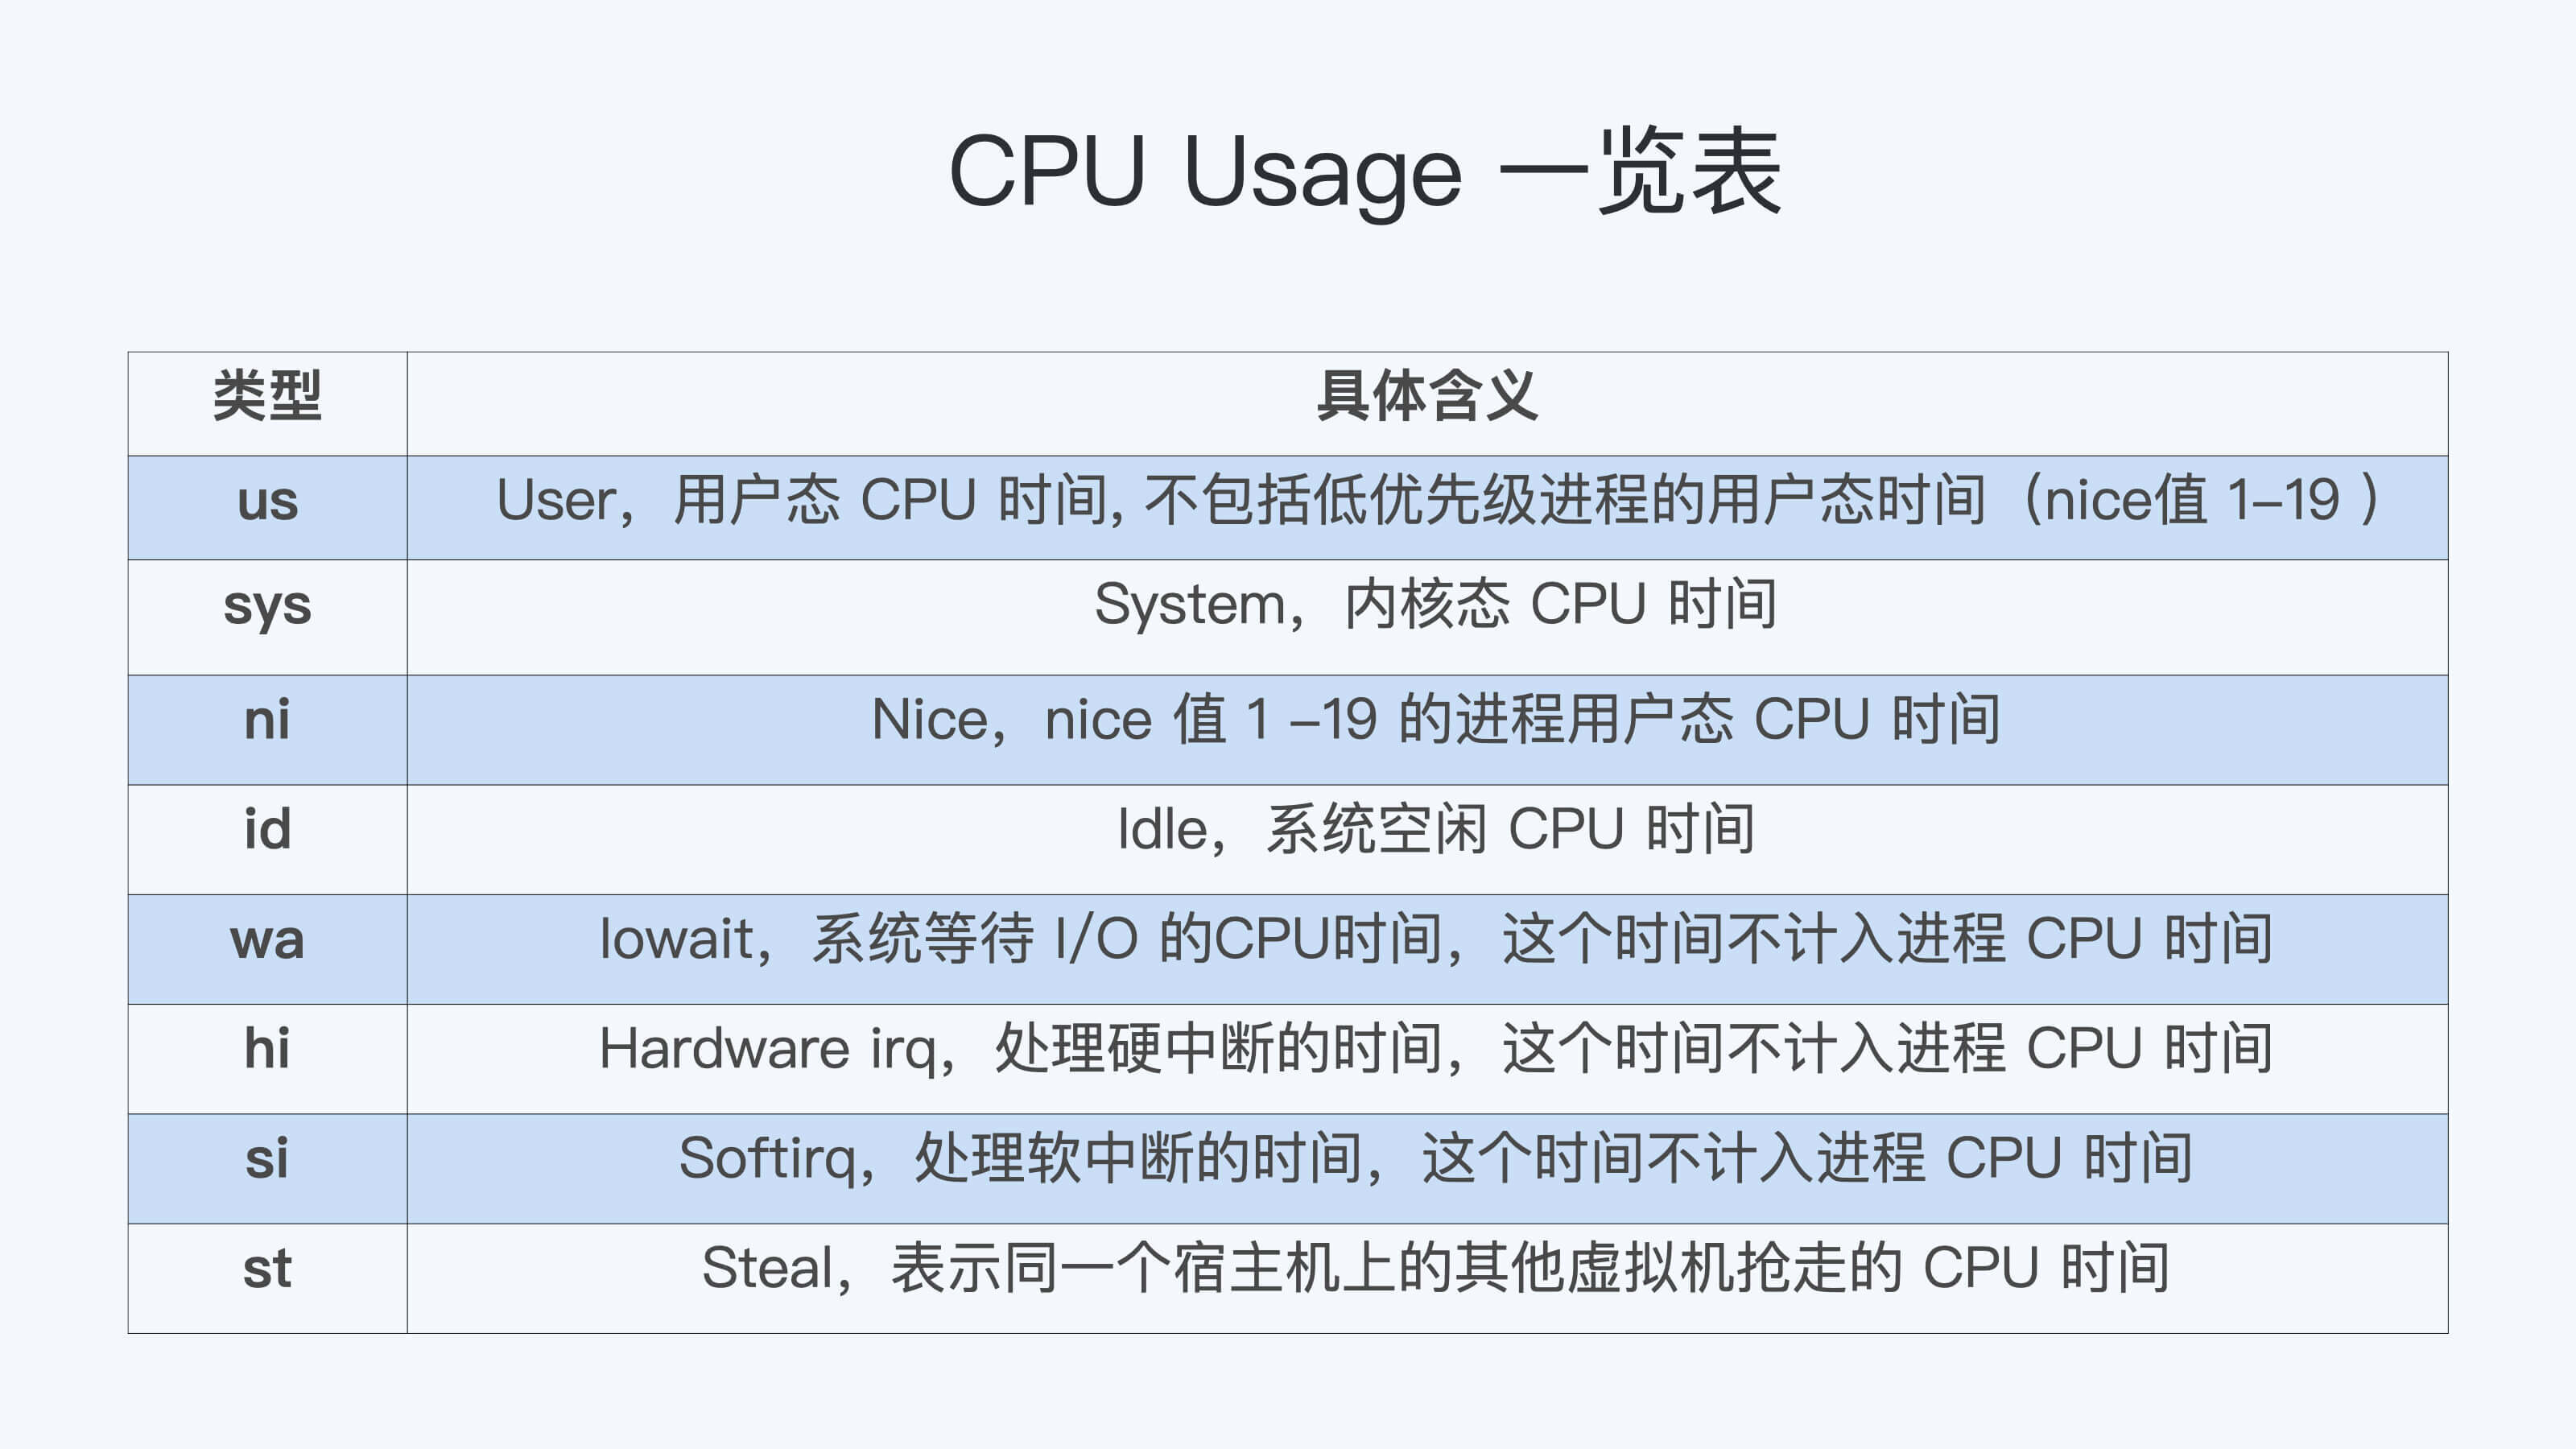 https://img.zhaoweiguo.com/knowledge/images/linuxs/kernels/cpu3.jpeg